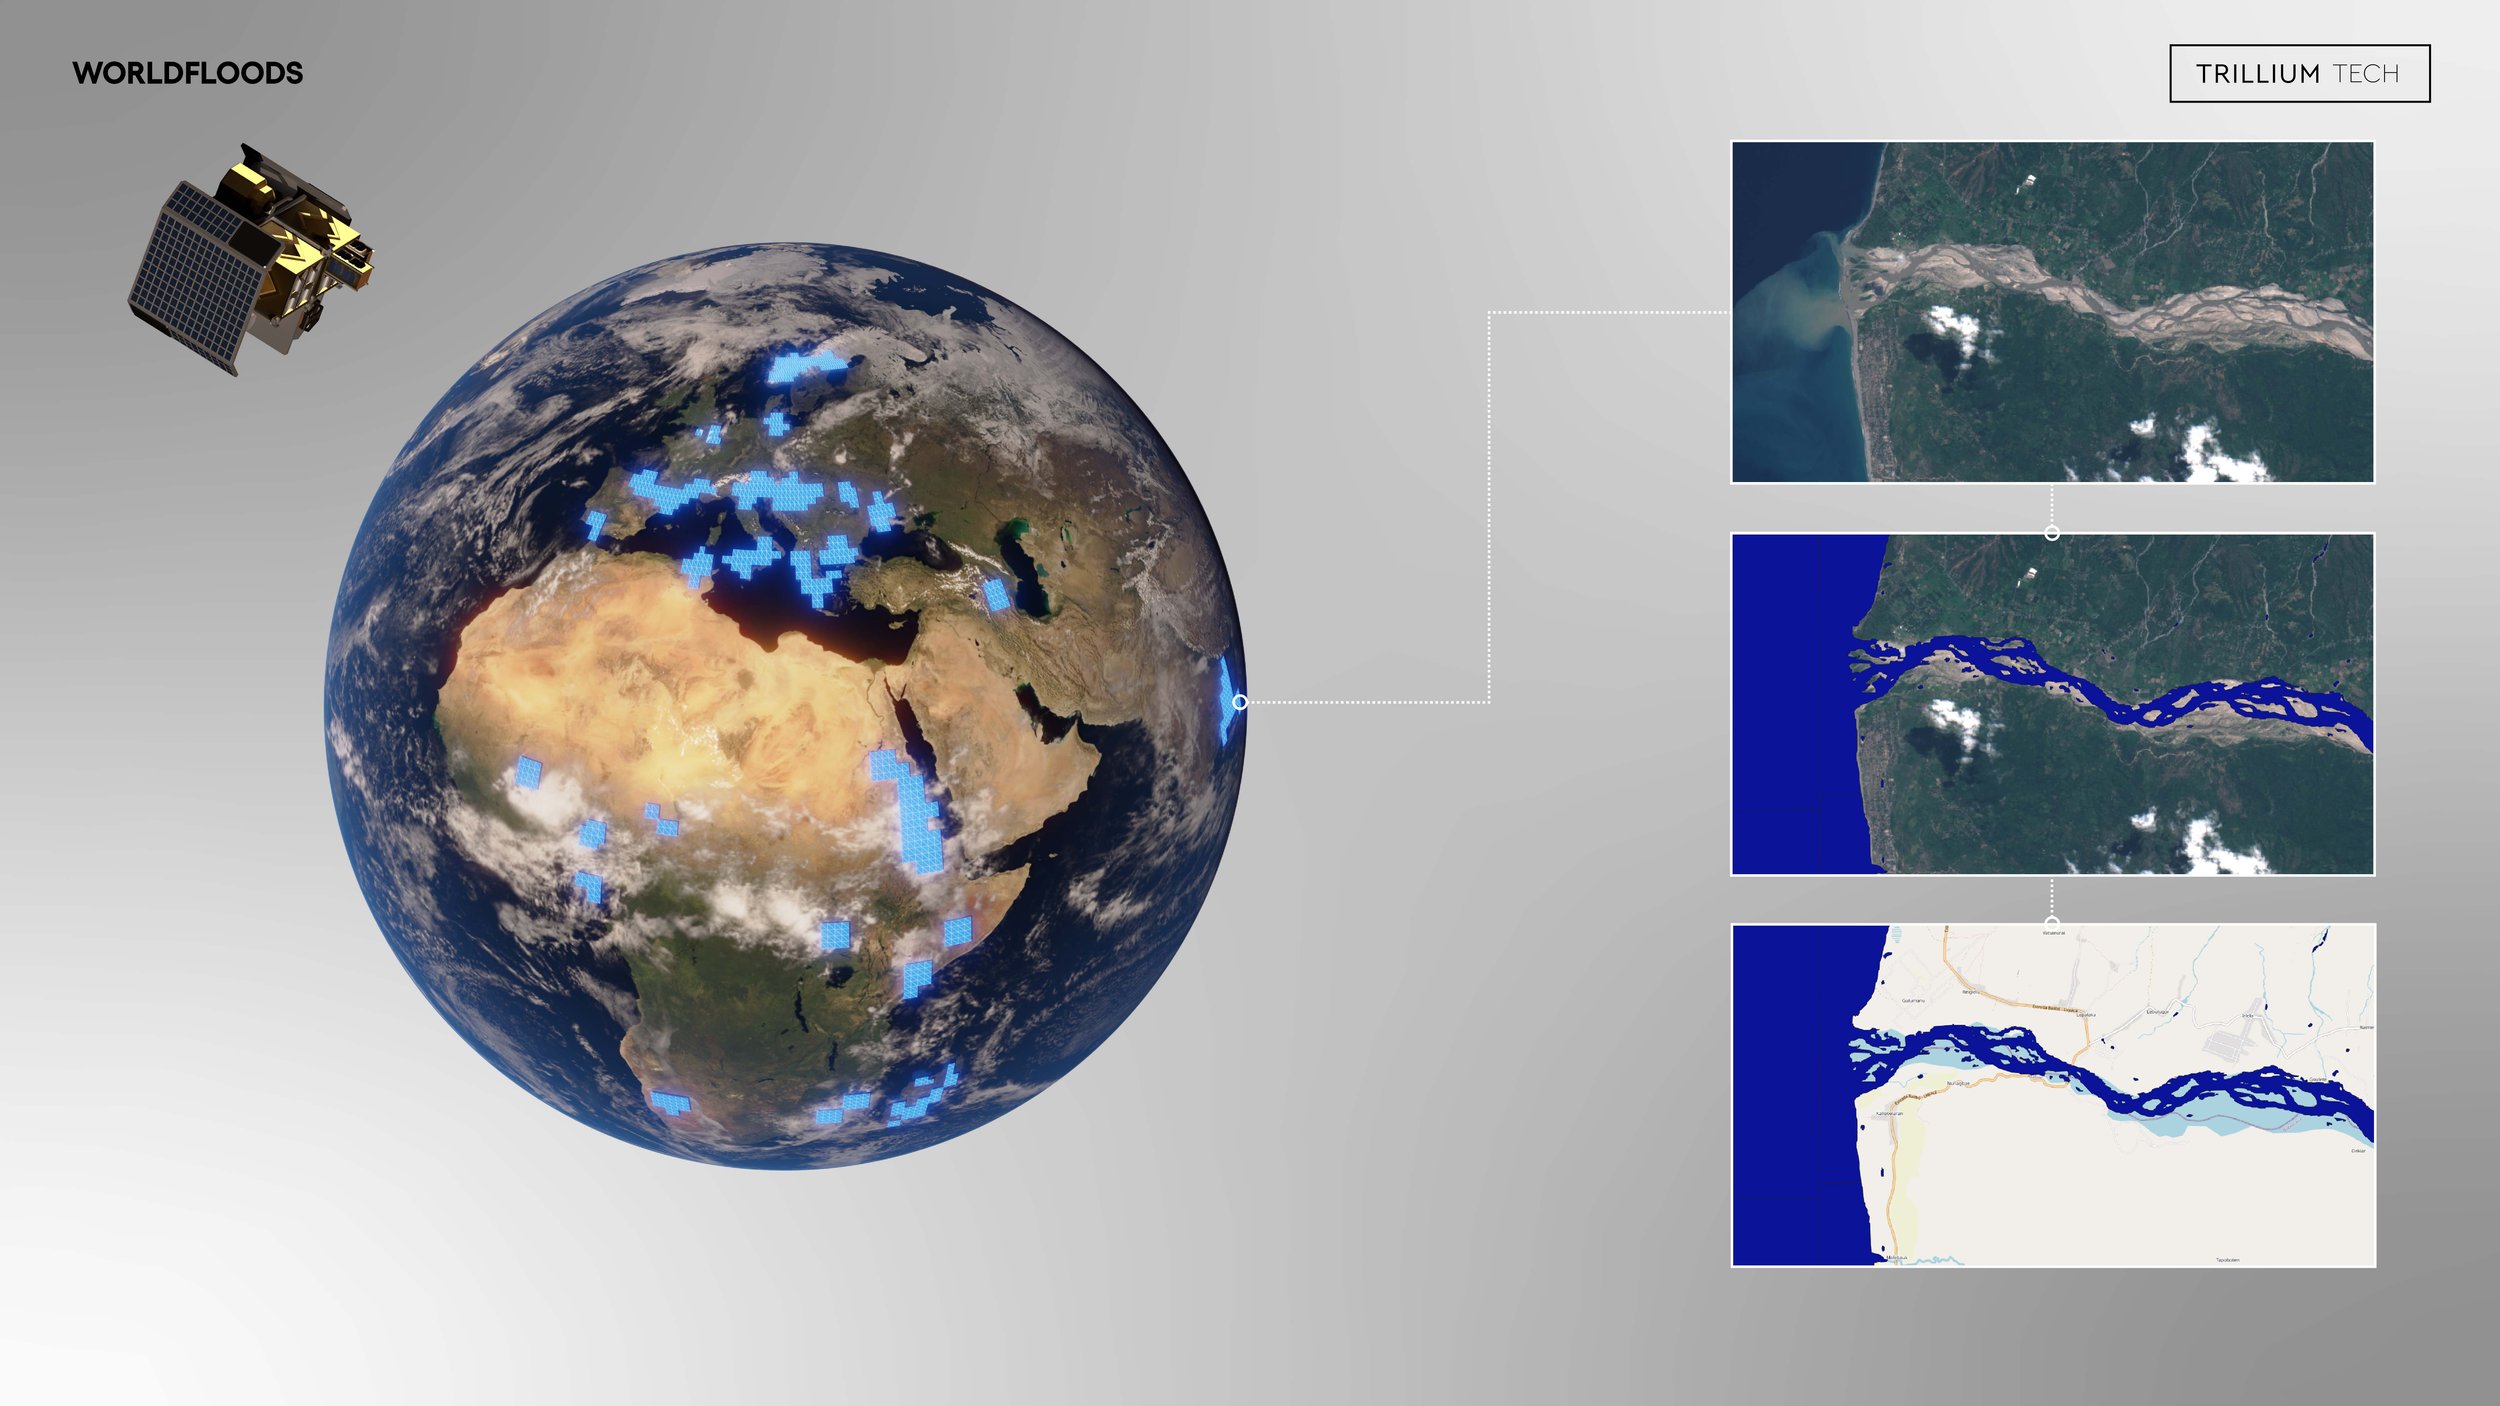   Worldfloods  was the first ever demonstration of a rapidly derived flood segmentation using ML on board a spacecraft in orbit. 